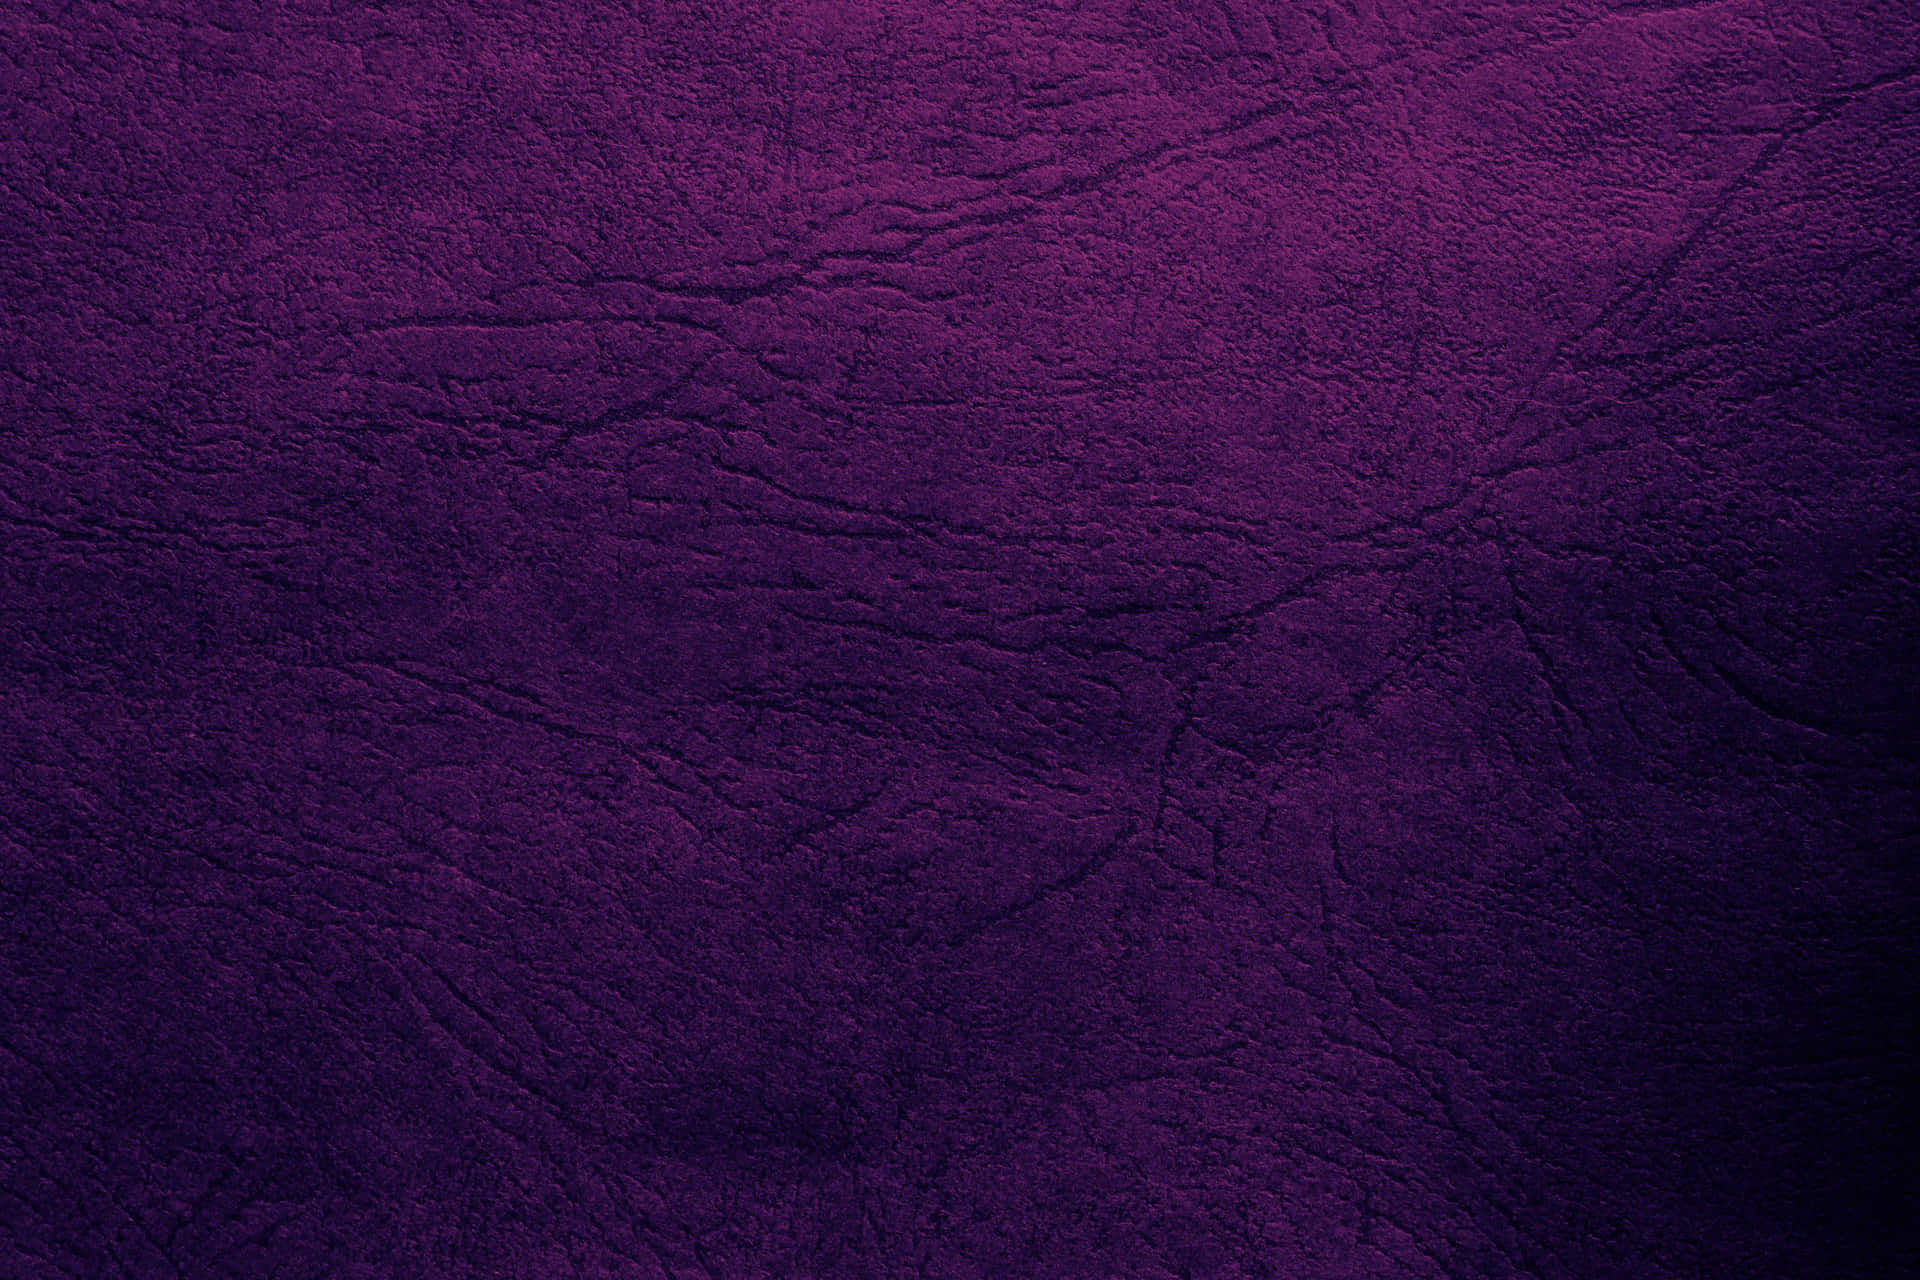 A Rich and Vibrant Purple Textured Background